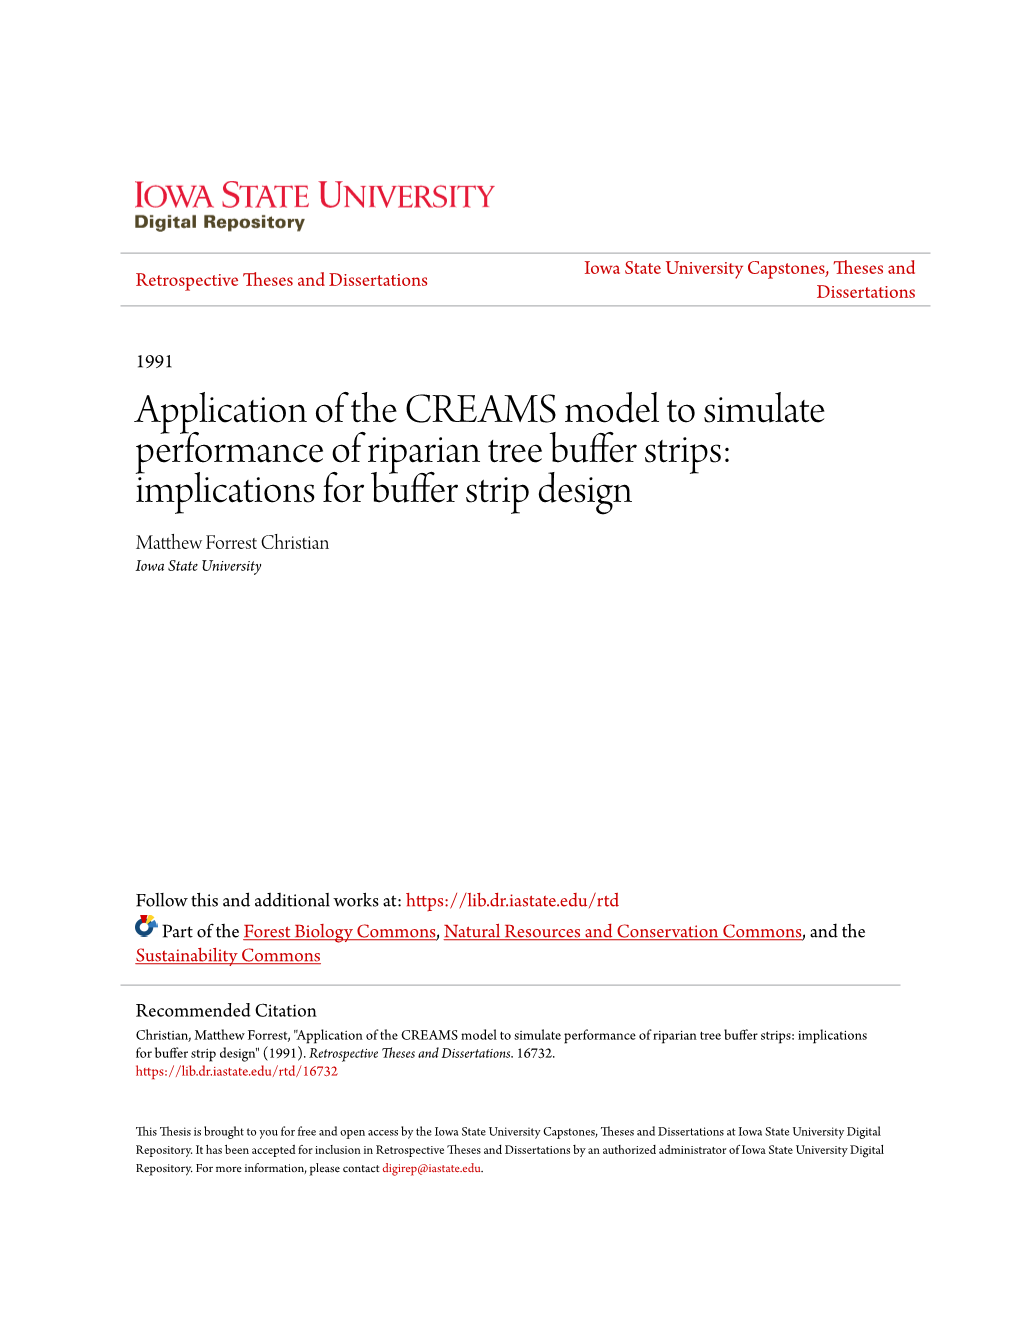 Application of the CREAMS Model to Simulate Performance Of